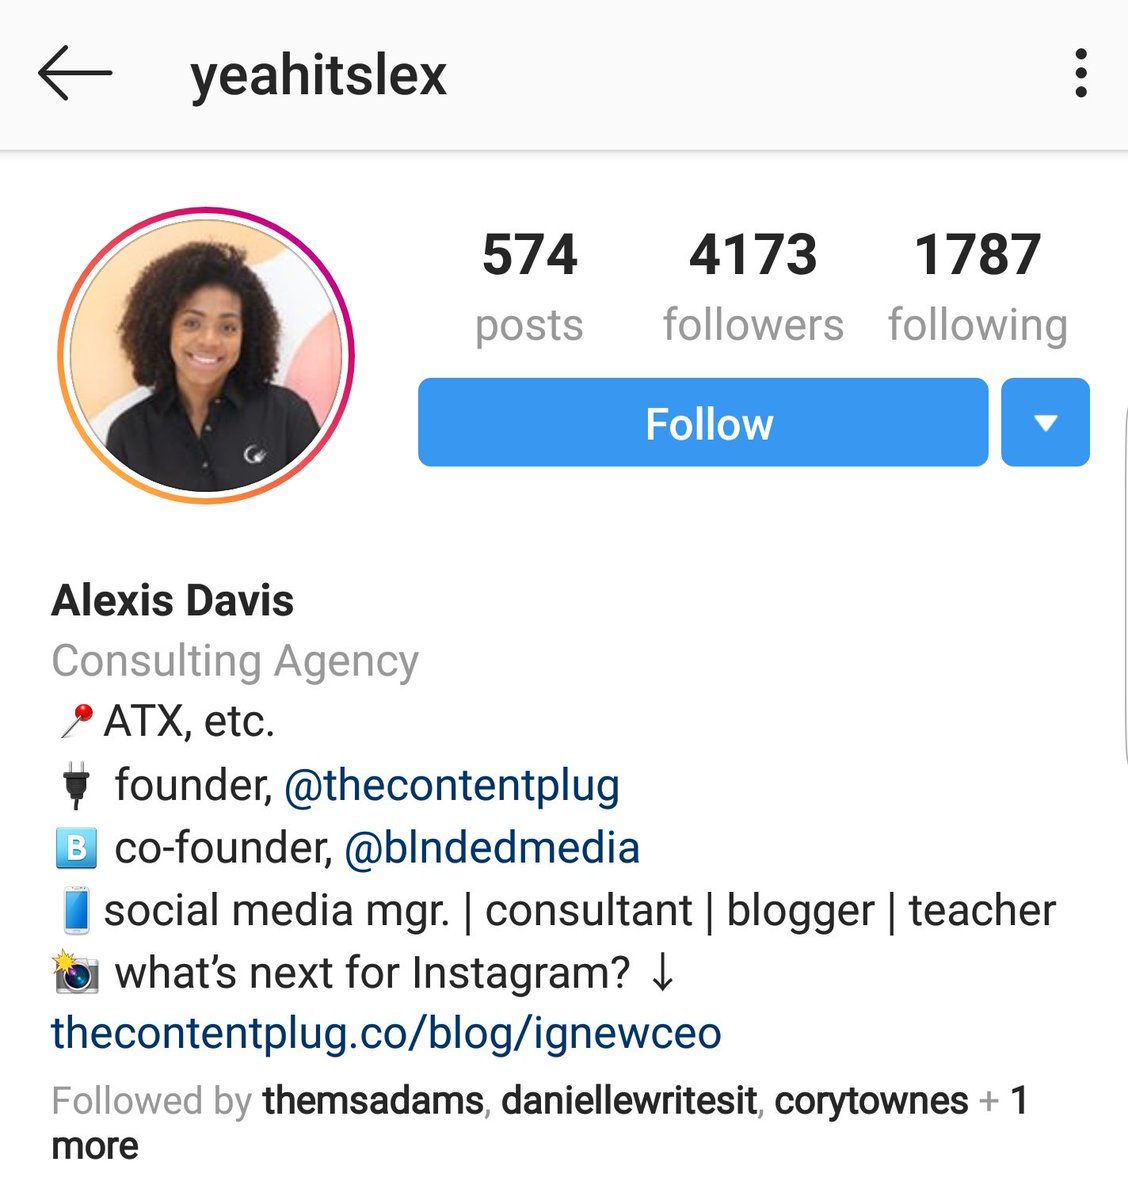 Alexis DavisIG: yeahitsalexConsulting AgencyFounder of TheContentPlugCo-founder of BLNDED MediaSocial Media manager + Consultant + blogger + teacher